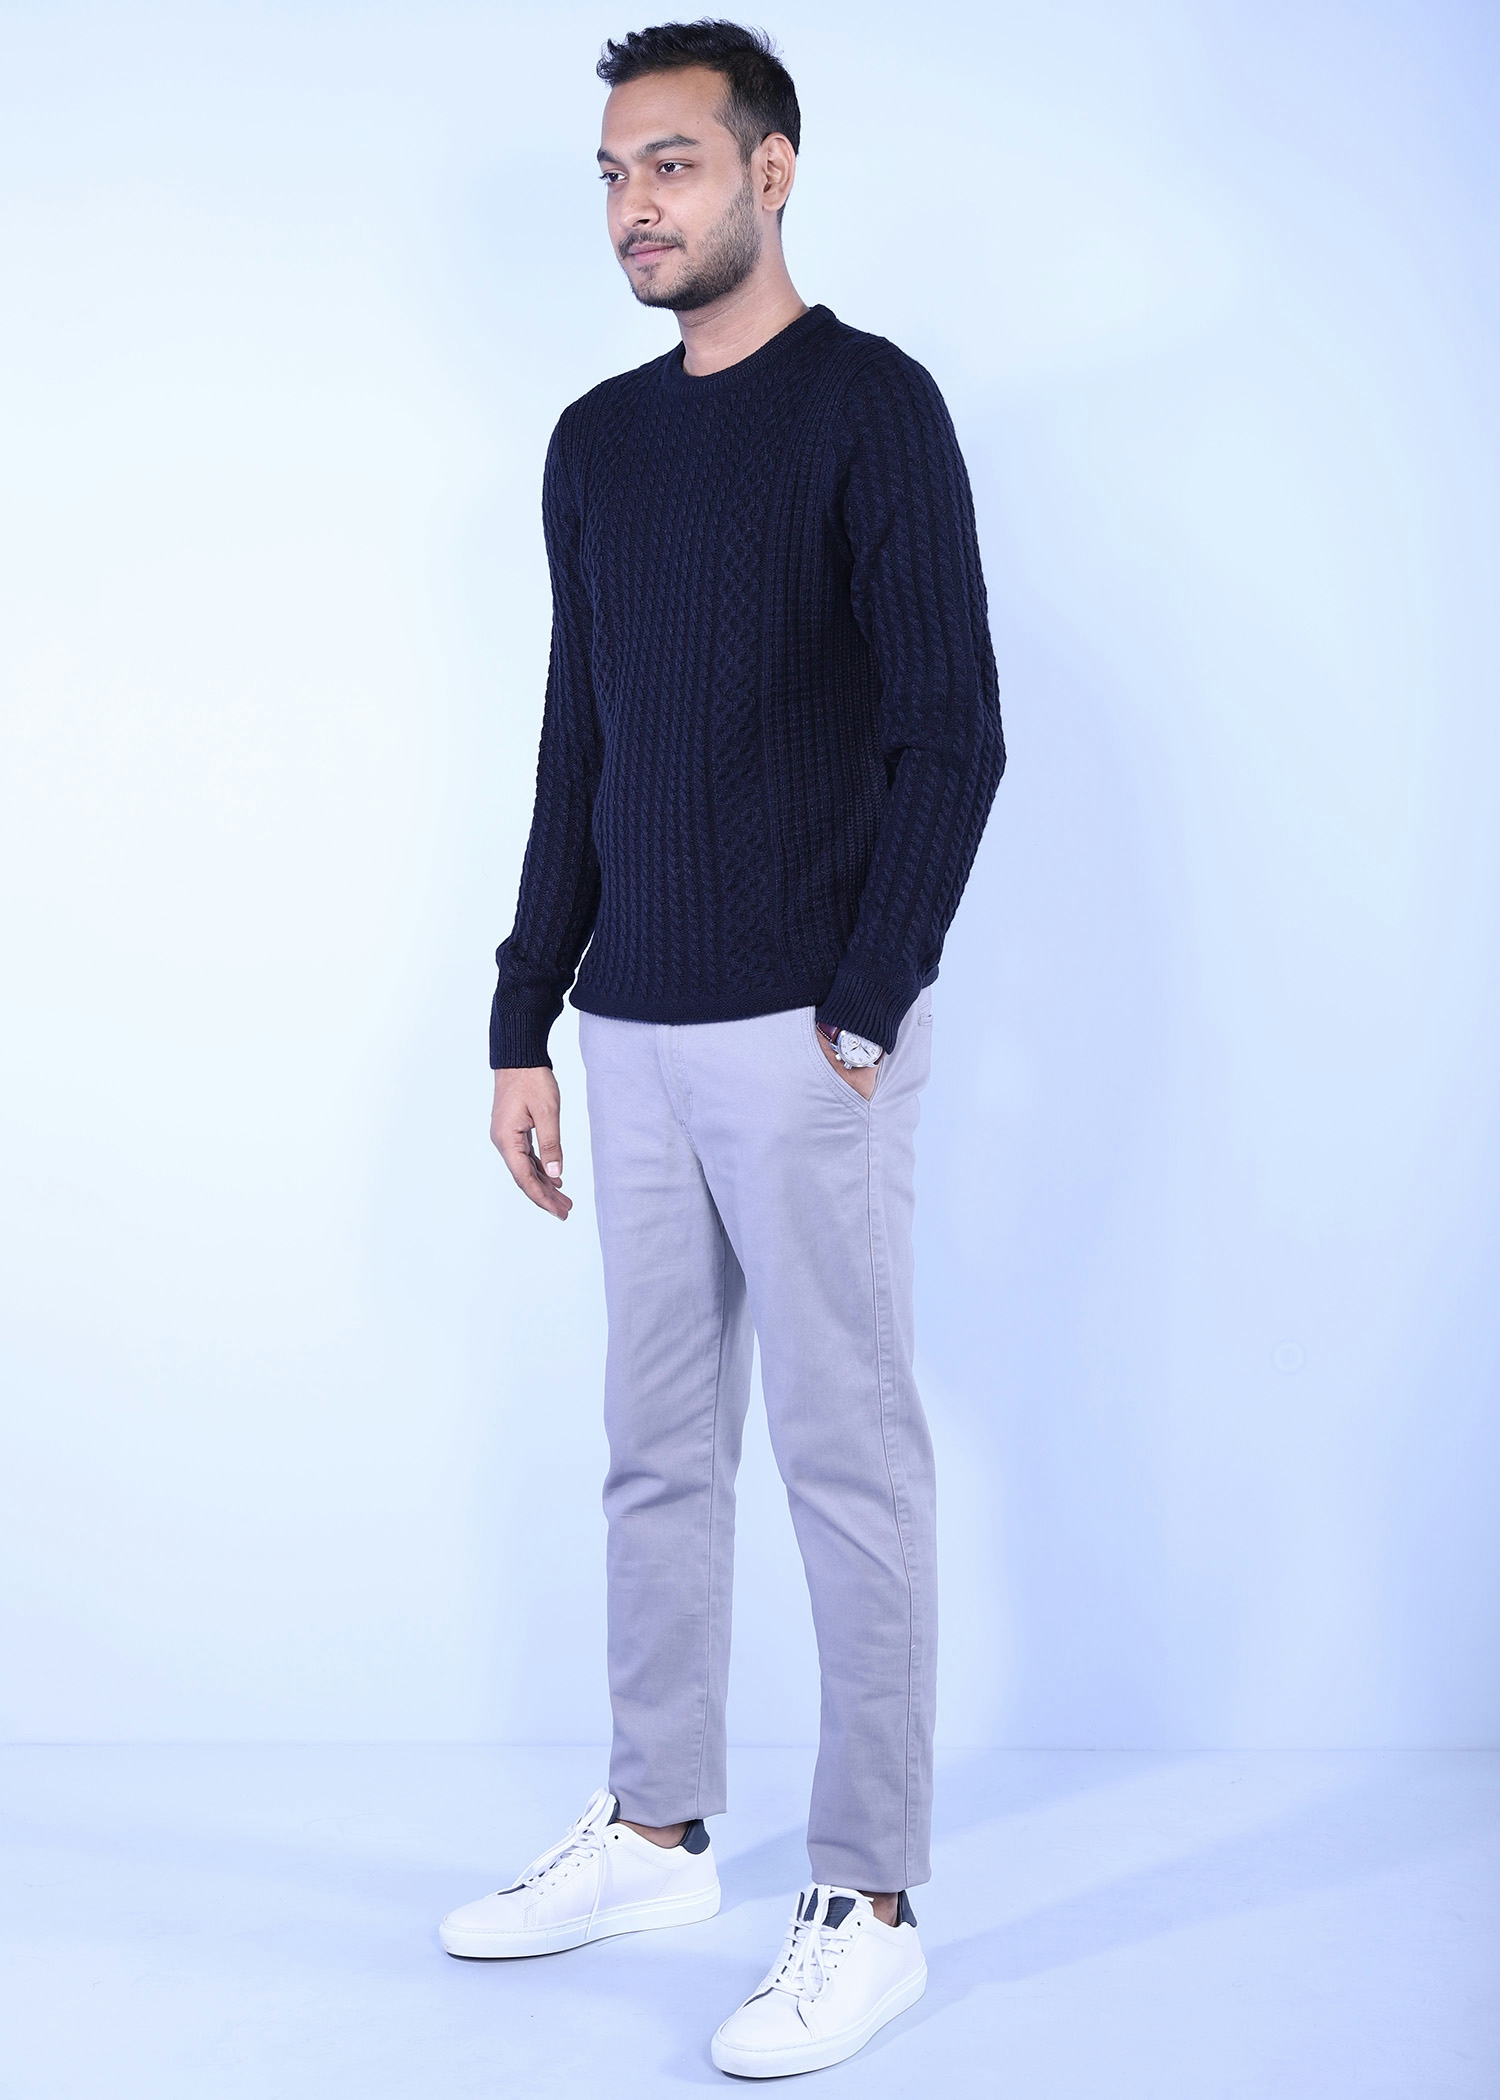 hillstar viii sweater navy color side view